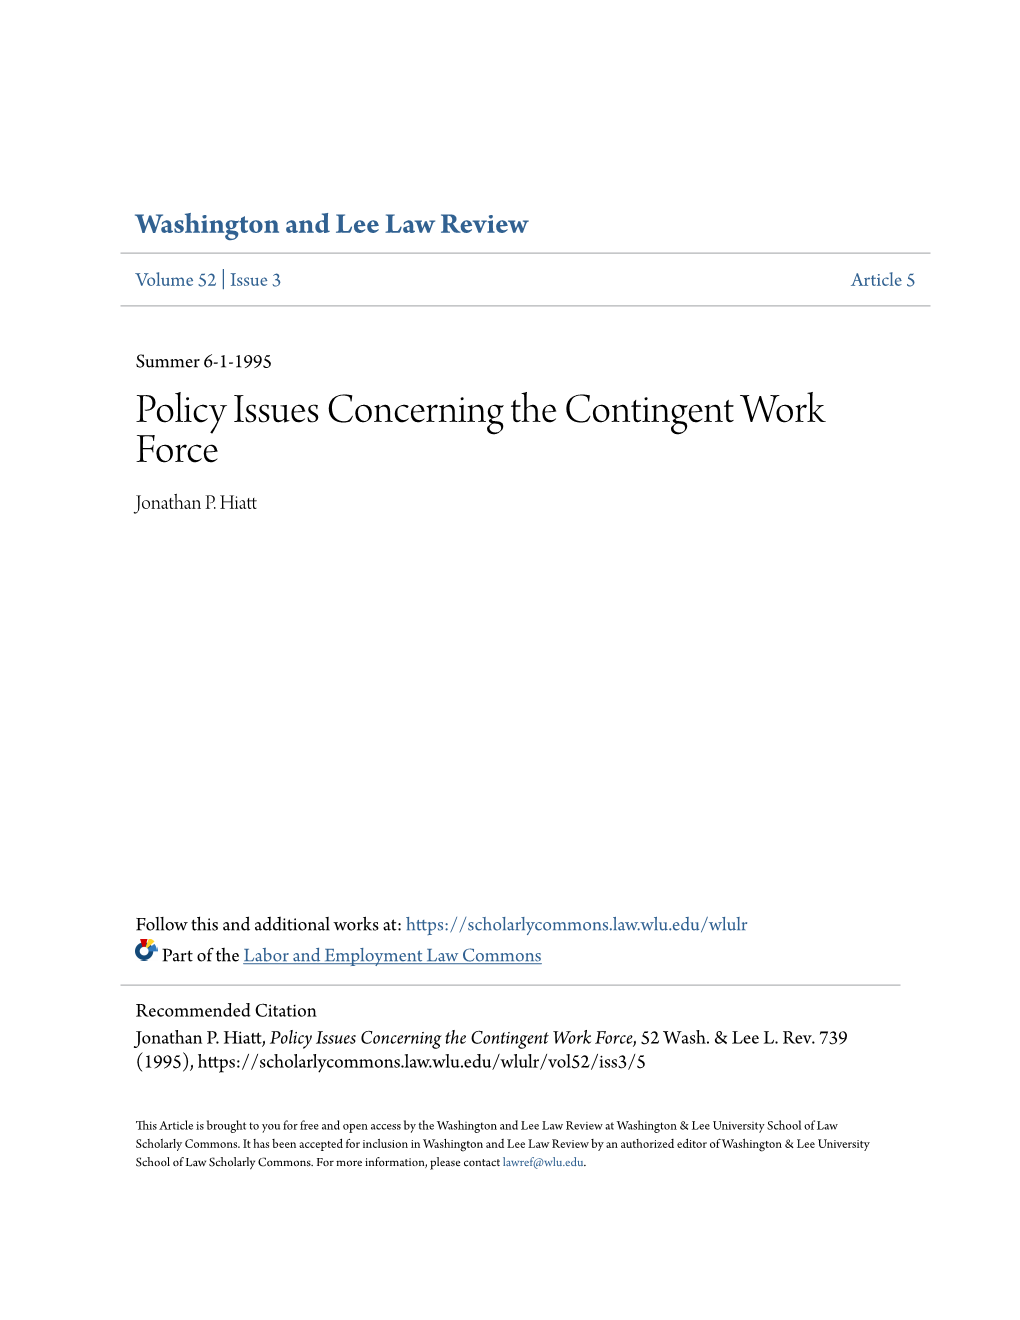 Policy Issues Concerning the Contingent Work Force Jonathan P